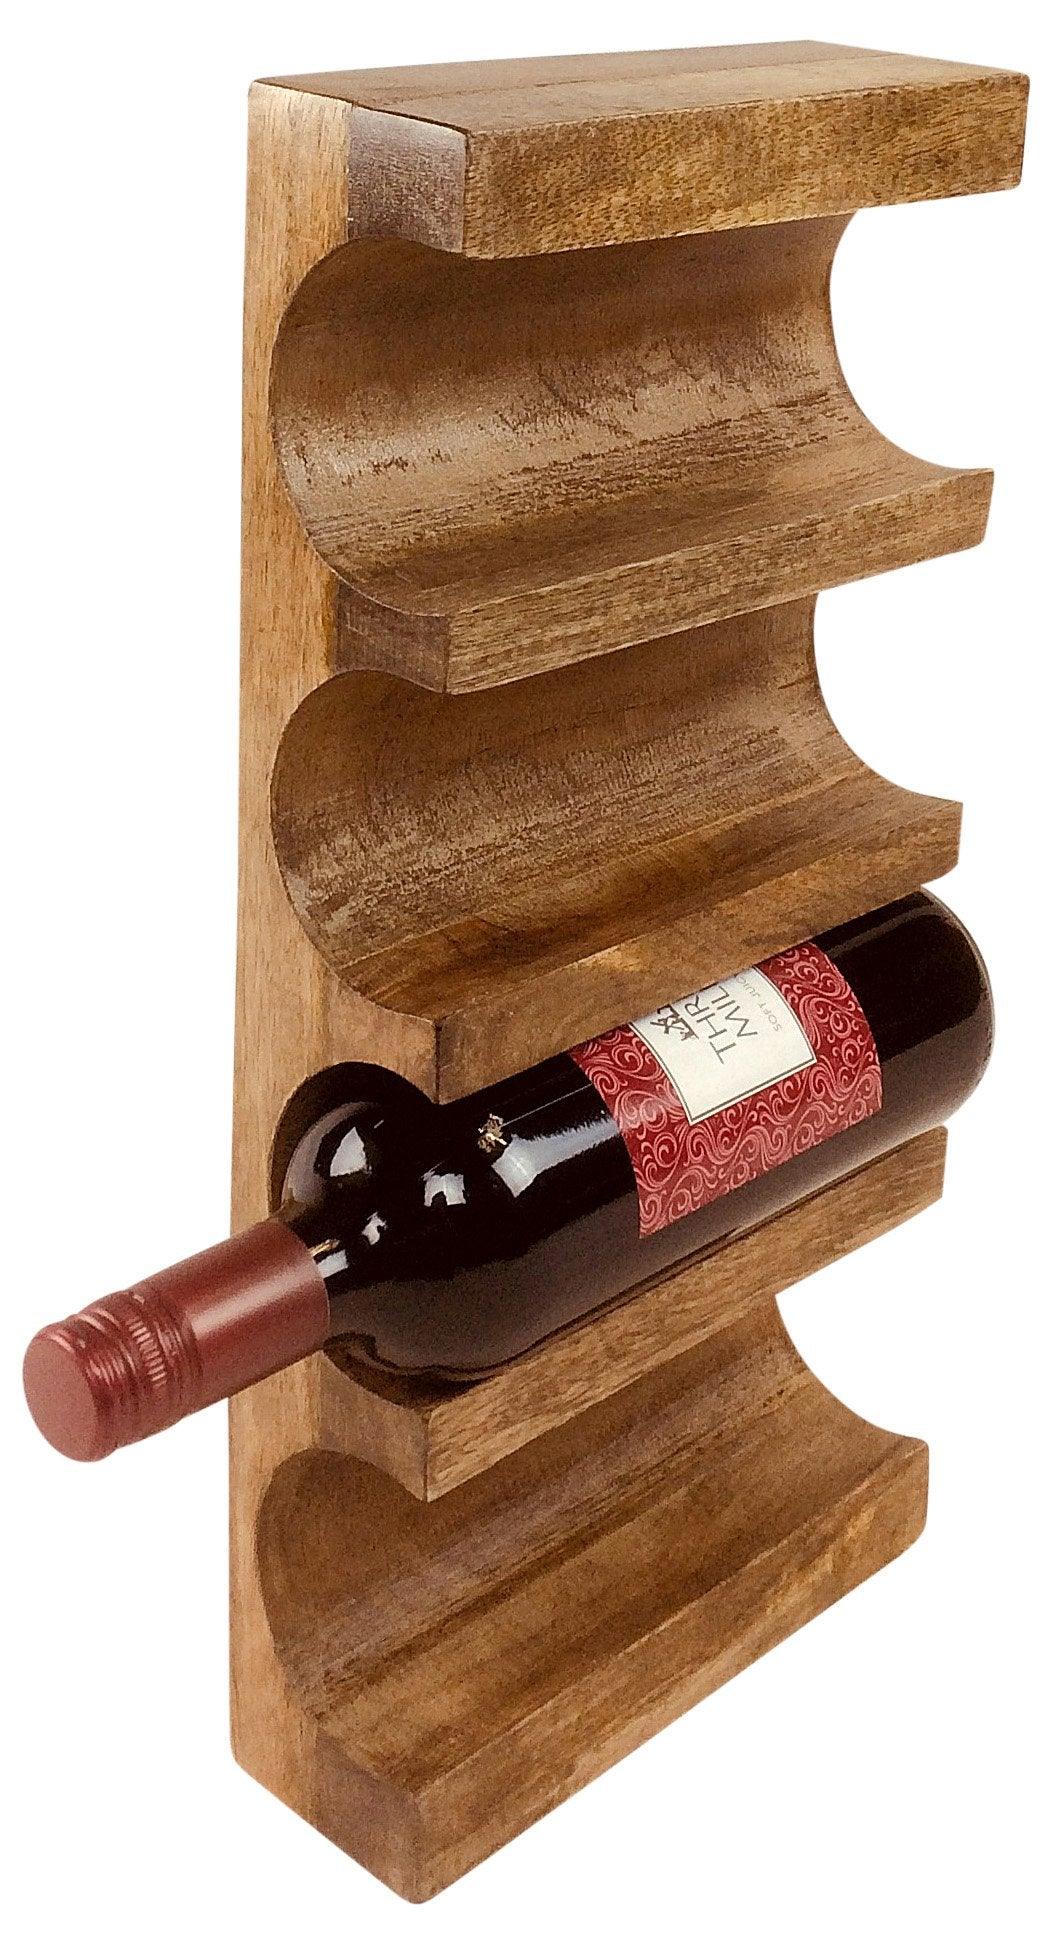 View Wall Mounted Wooden Wine Rack information